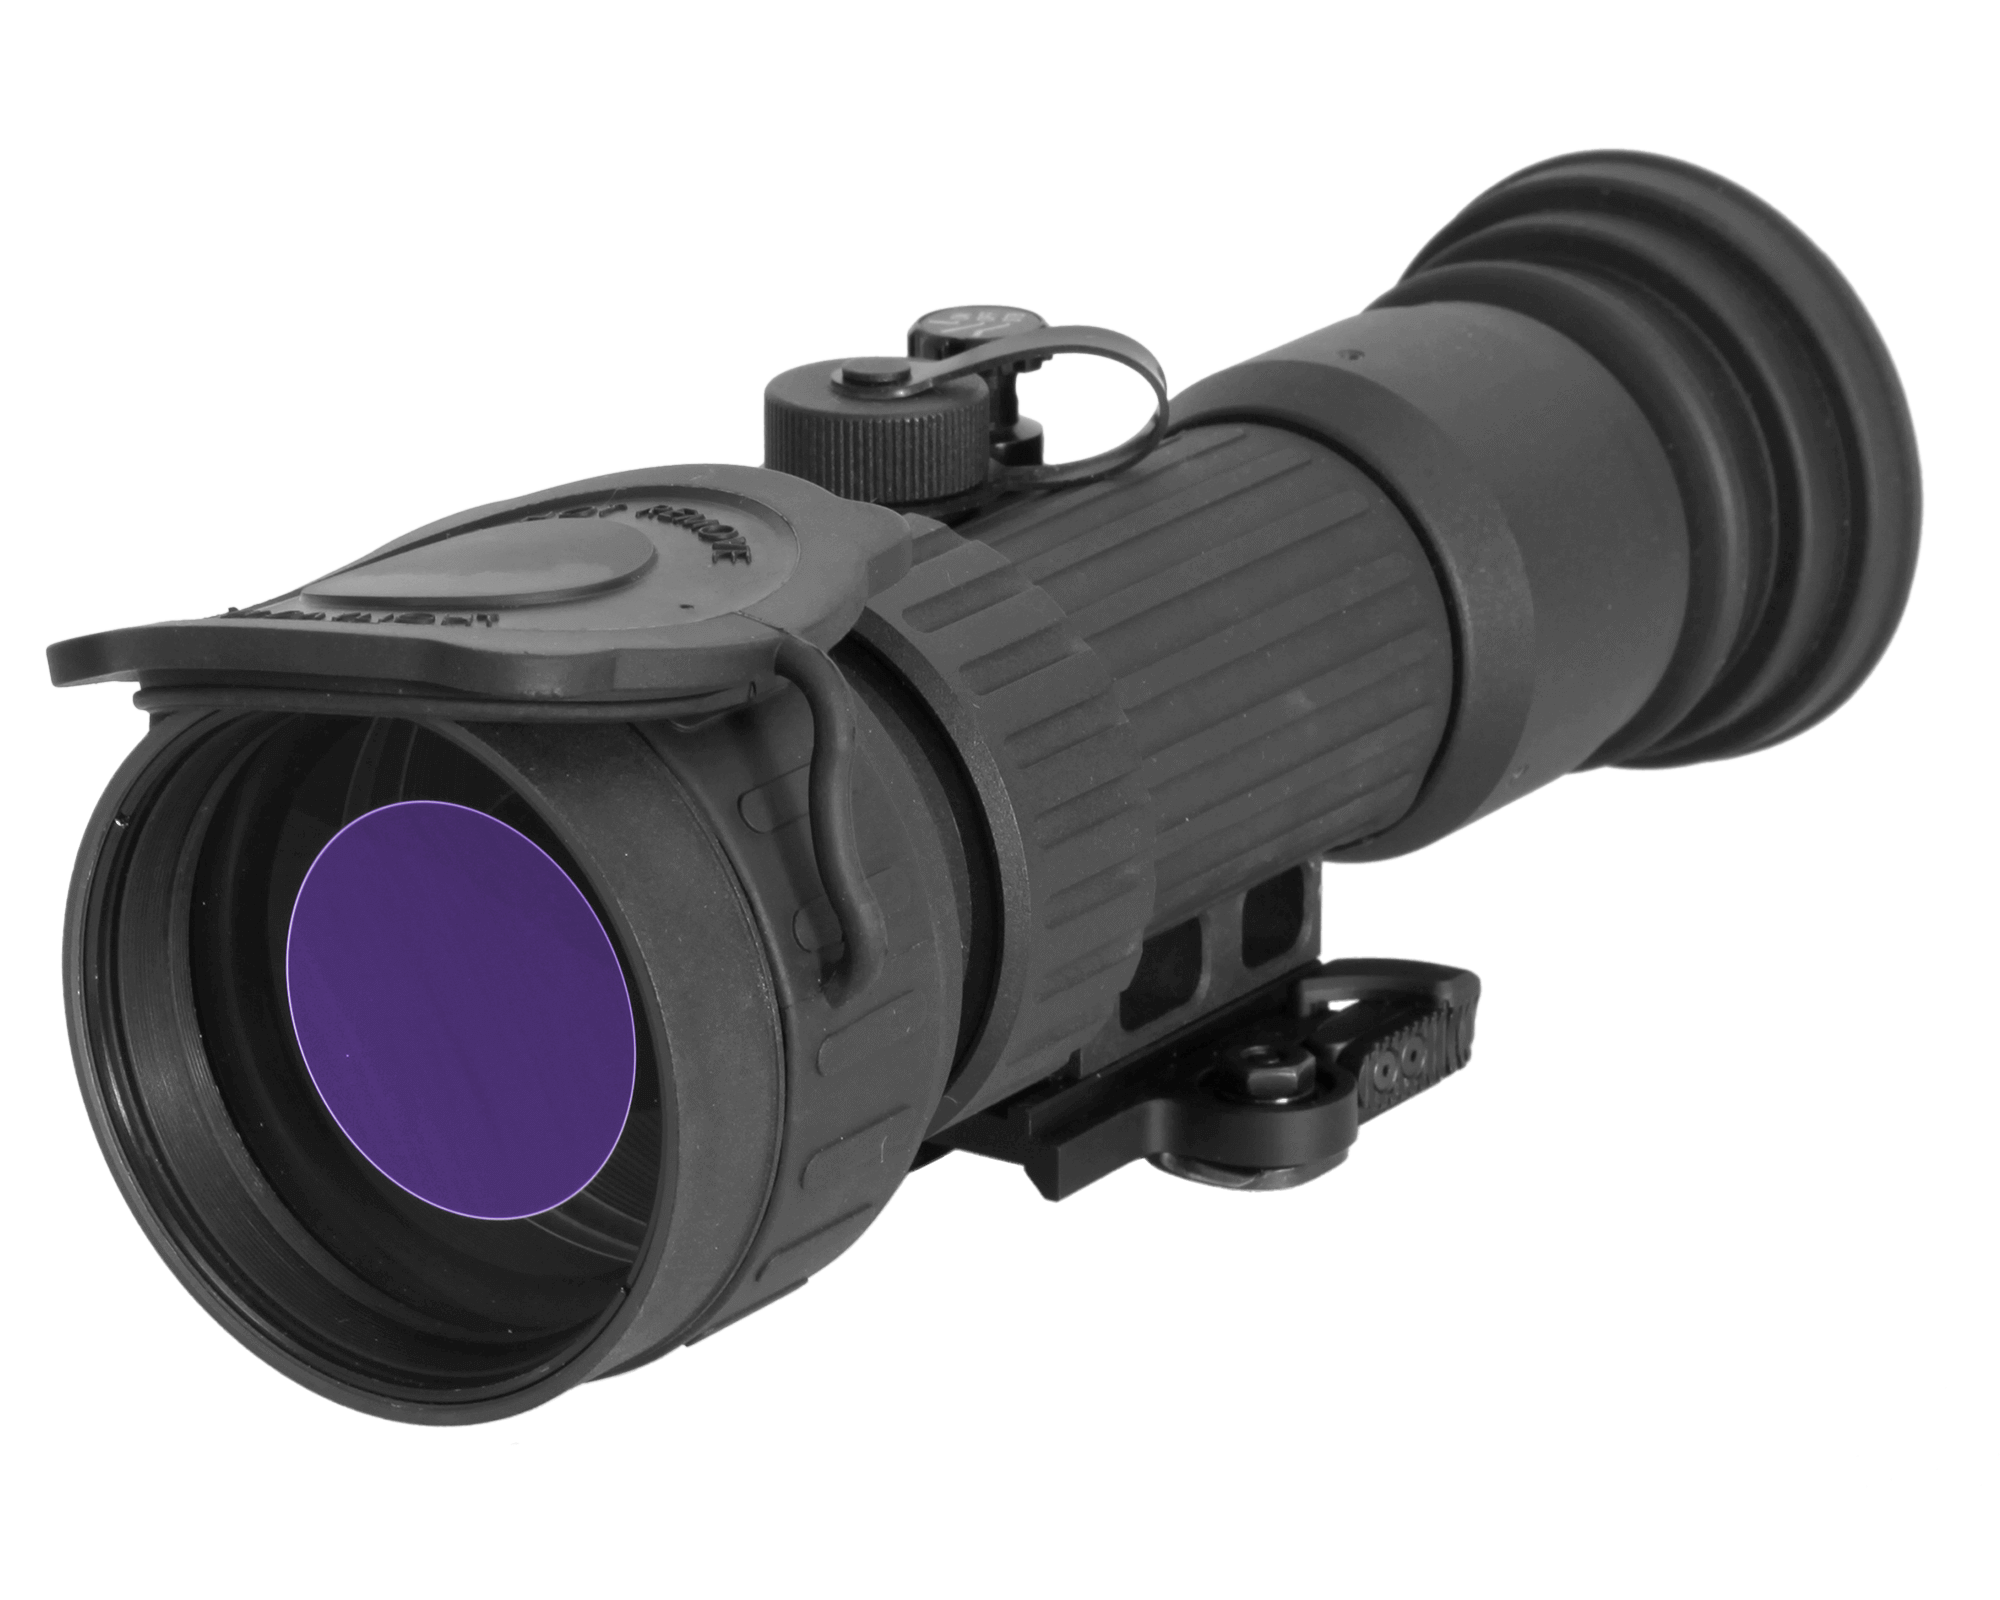 ps28 night vision converter for daytime rifle scope